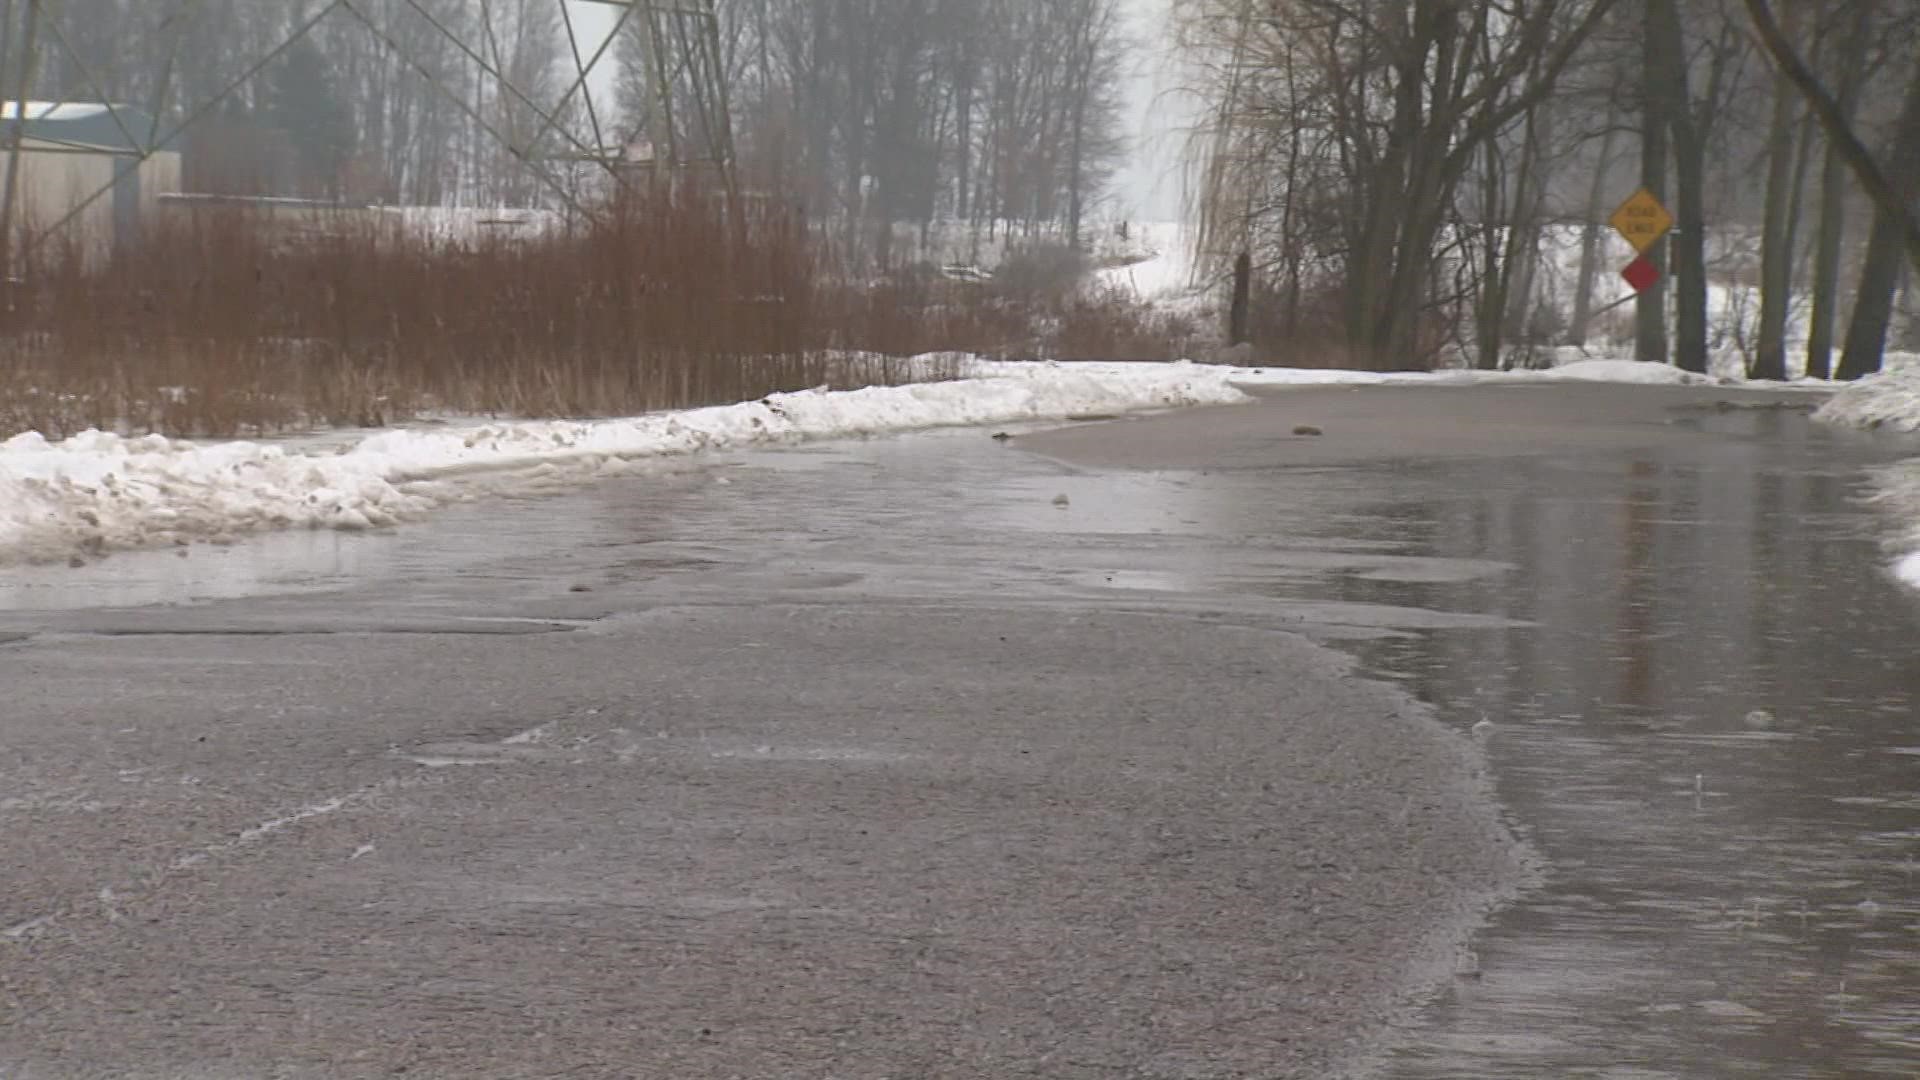 Ice jams are a concern as rising temperatures melt snow and ice along rivers and streams.